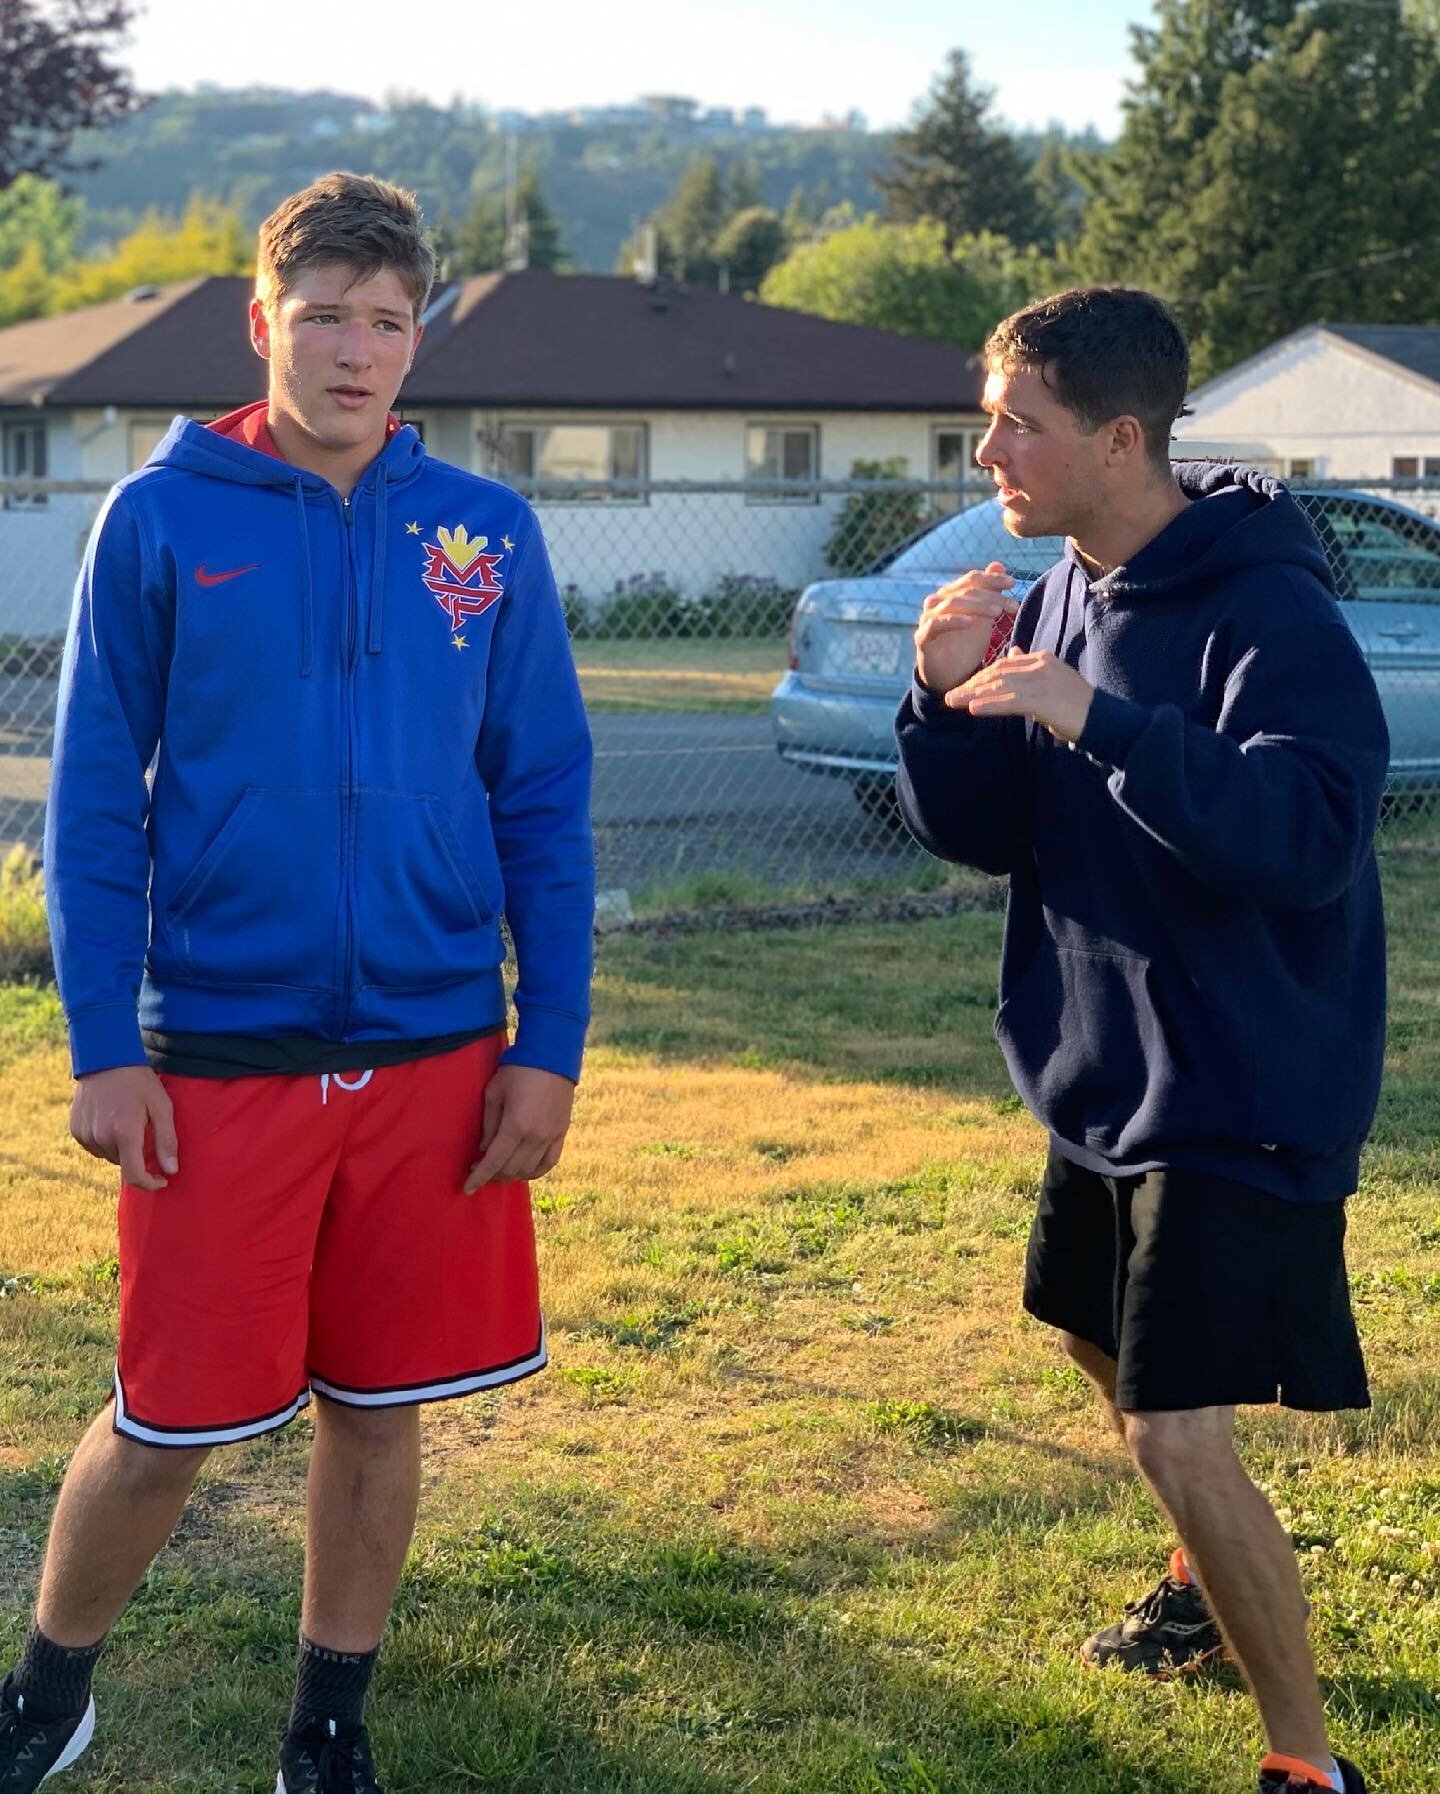 Caught some teaching moments from class last night! Coach Anthony does a great job explaining and breaking down the drills. 

#outside #outsidetraining #langfordbc #yyj #boxing #teaching #coaching #boxingtraining #boxingfootworkdrills #boxinglife #we